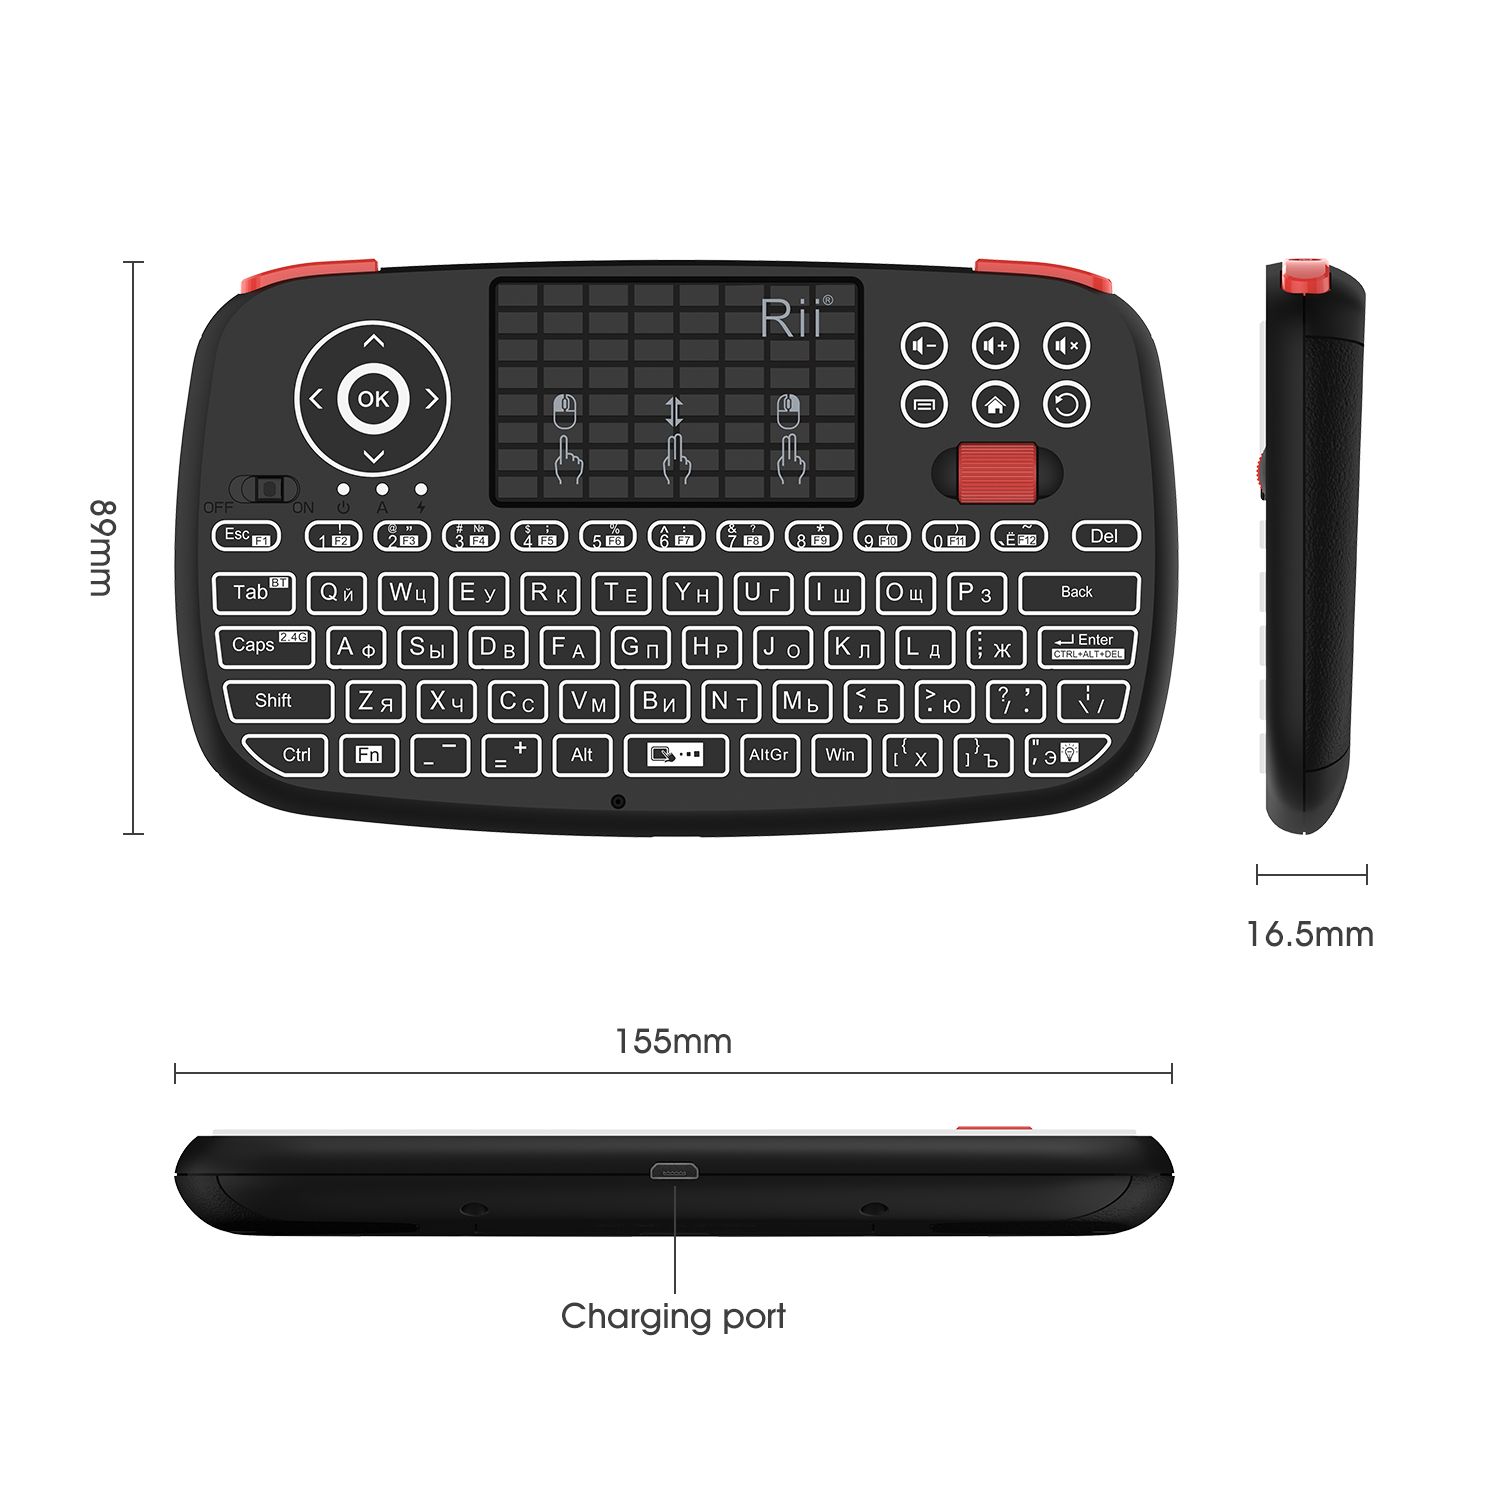 Rii-i4-Russian-Mini-Keyboard-24G-Bluetooth-Dual-Modes-Keyboard-Fingerboard-Backlit-Mouse-Touchpad-Re-1761118